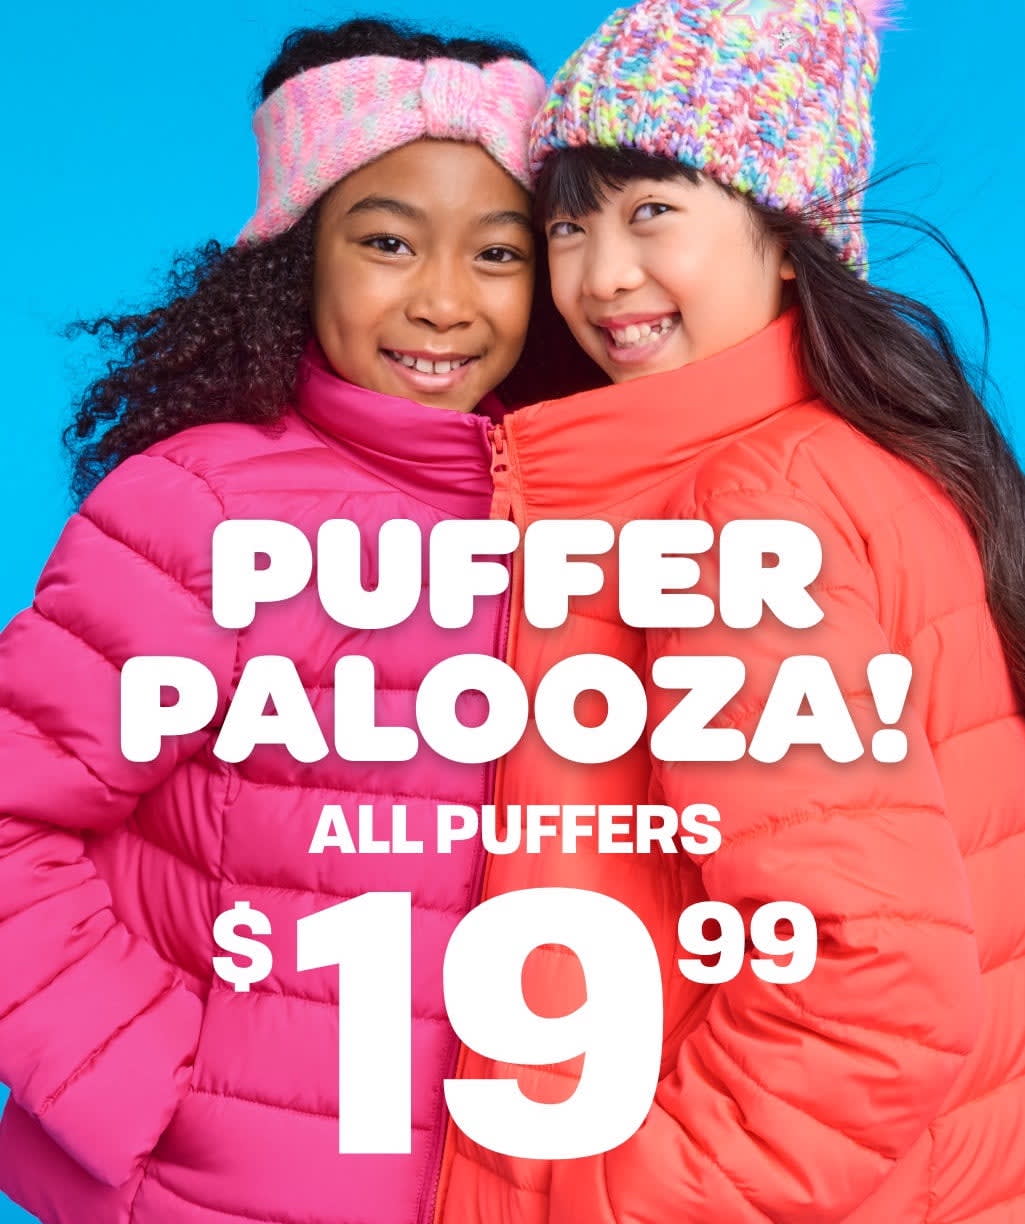 Limited Time Only! Puffer Palooza! $19.99 